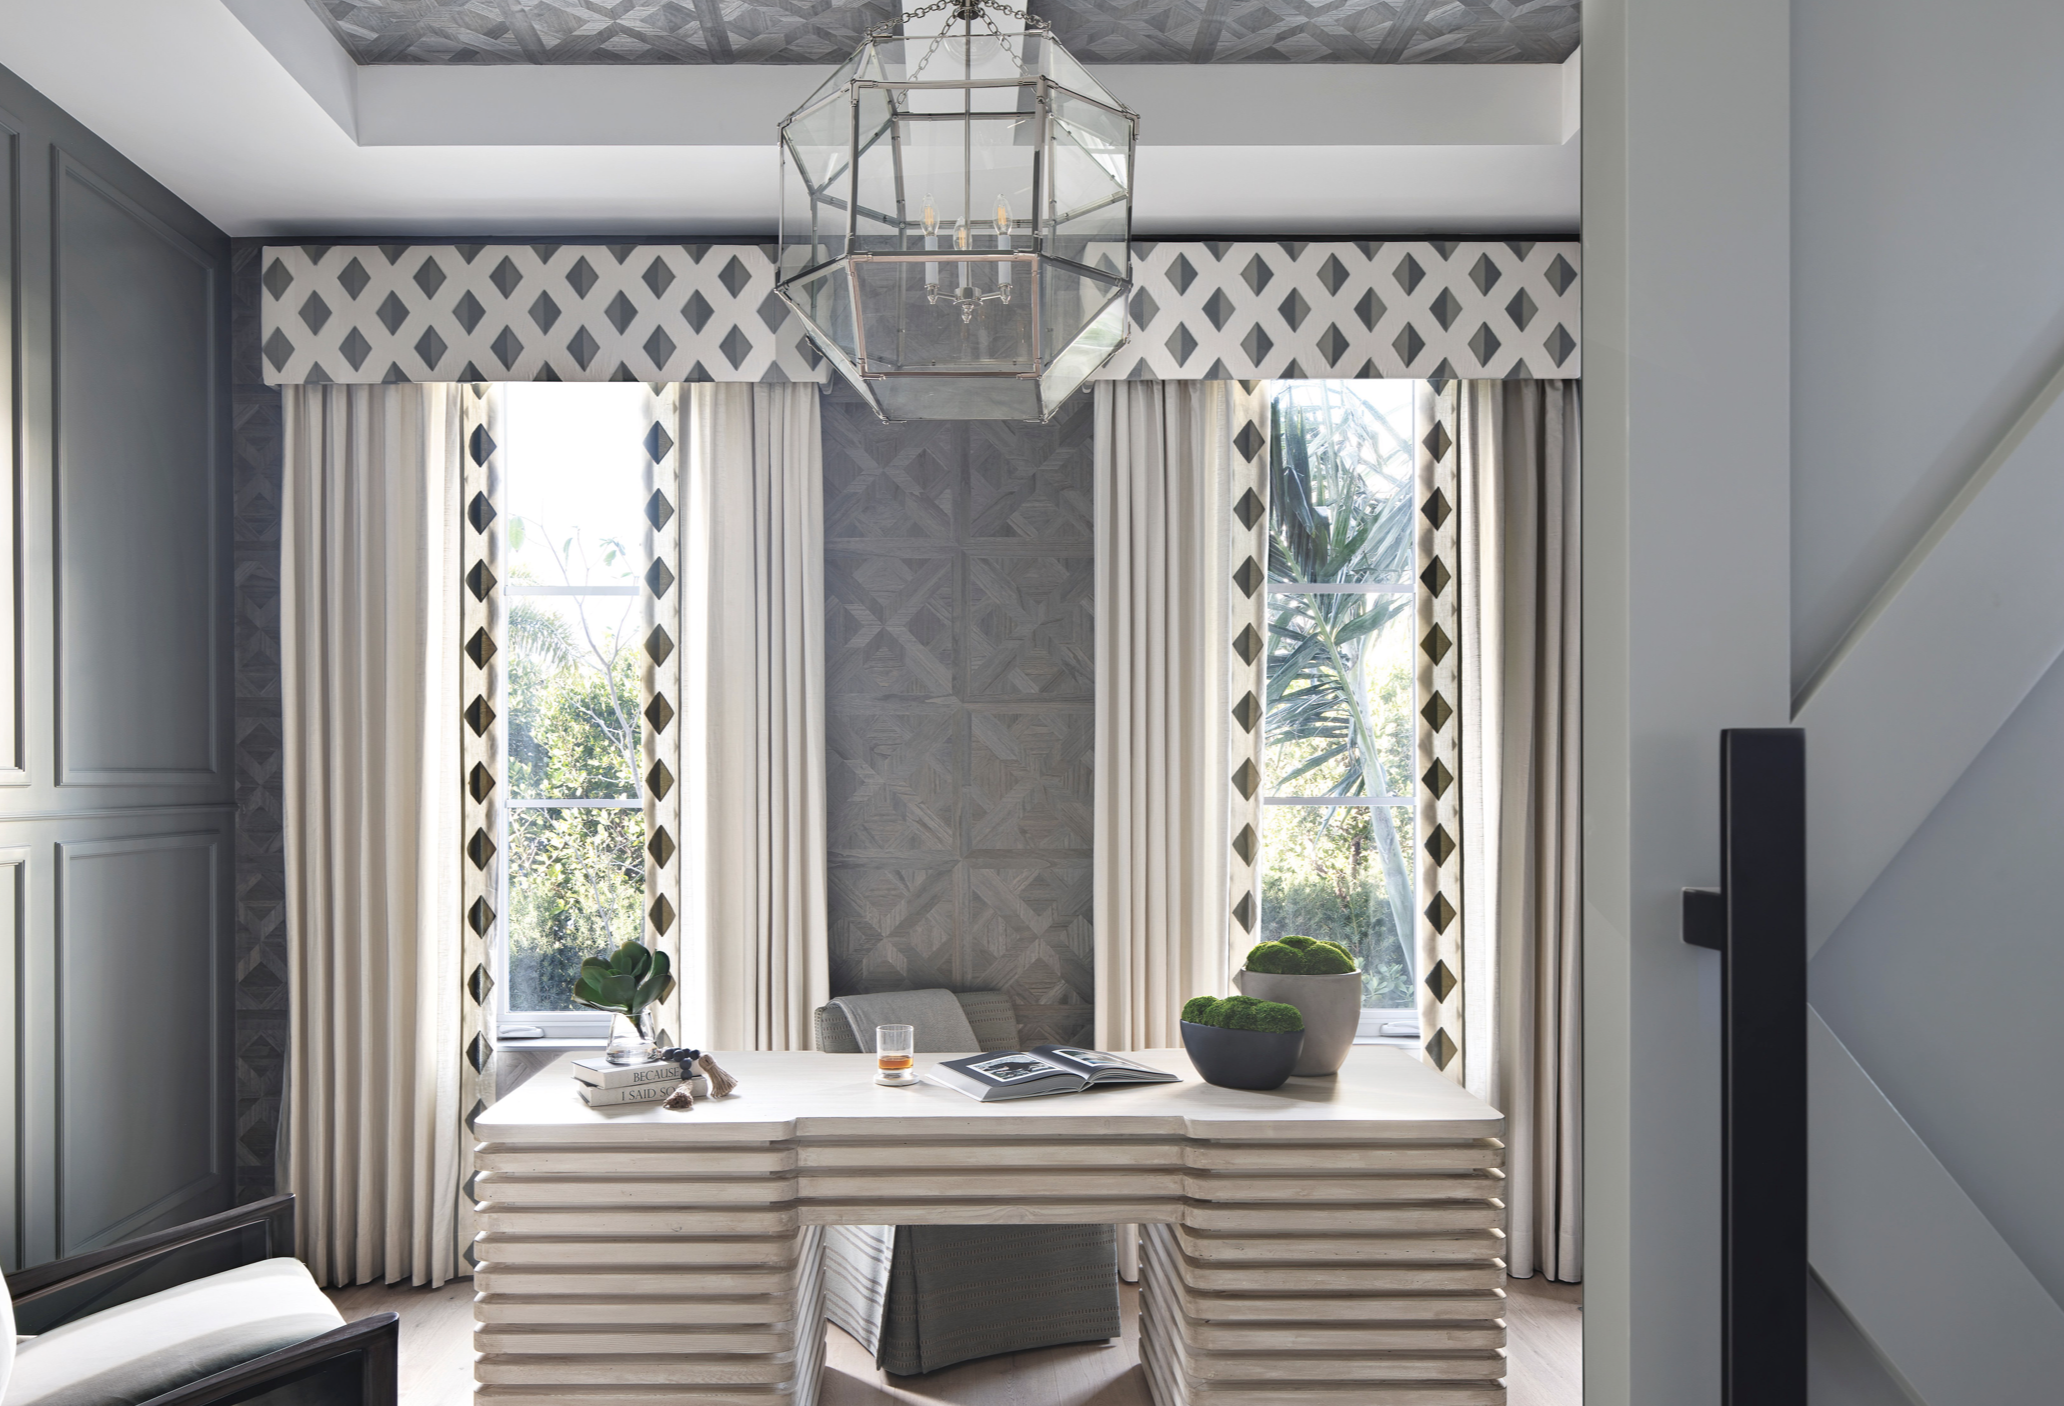 
The home office outfitted in shades of gray is anything but boring, thanks to the unique woodwork and the geometric-print window treatments. The custom desk anchors the room. Find a similar pendant here.

